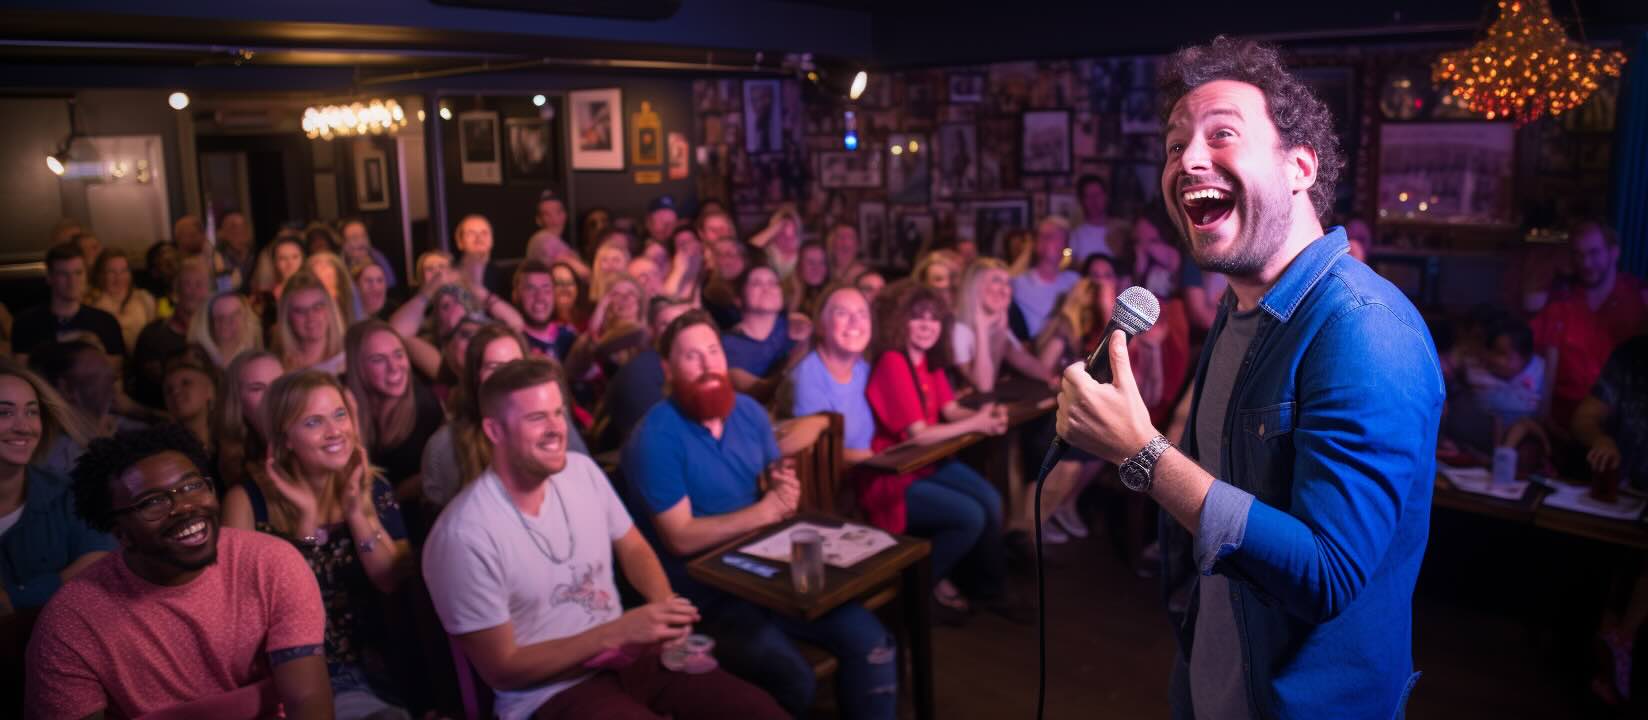 Free Comedy Shows in Your City